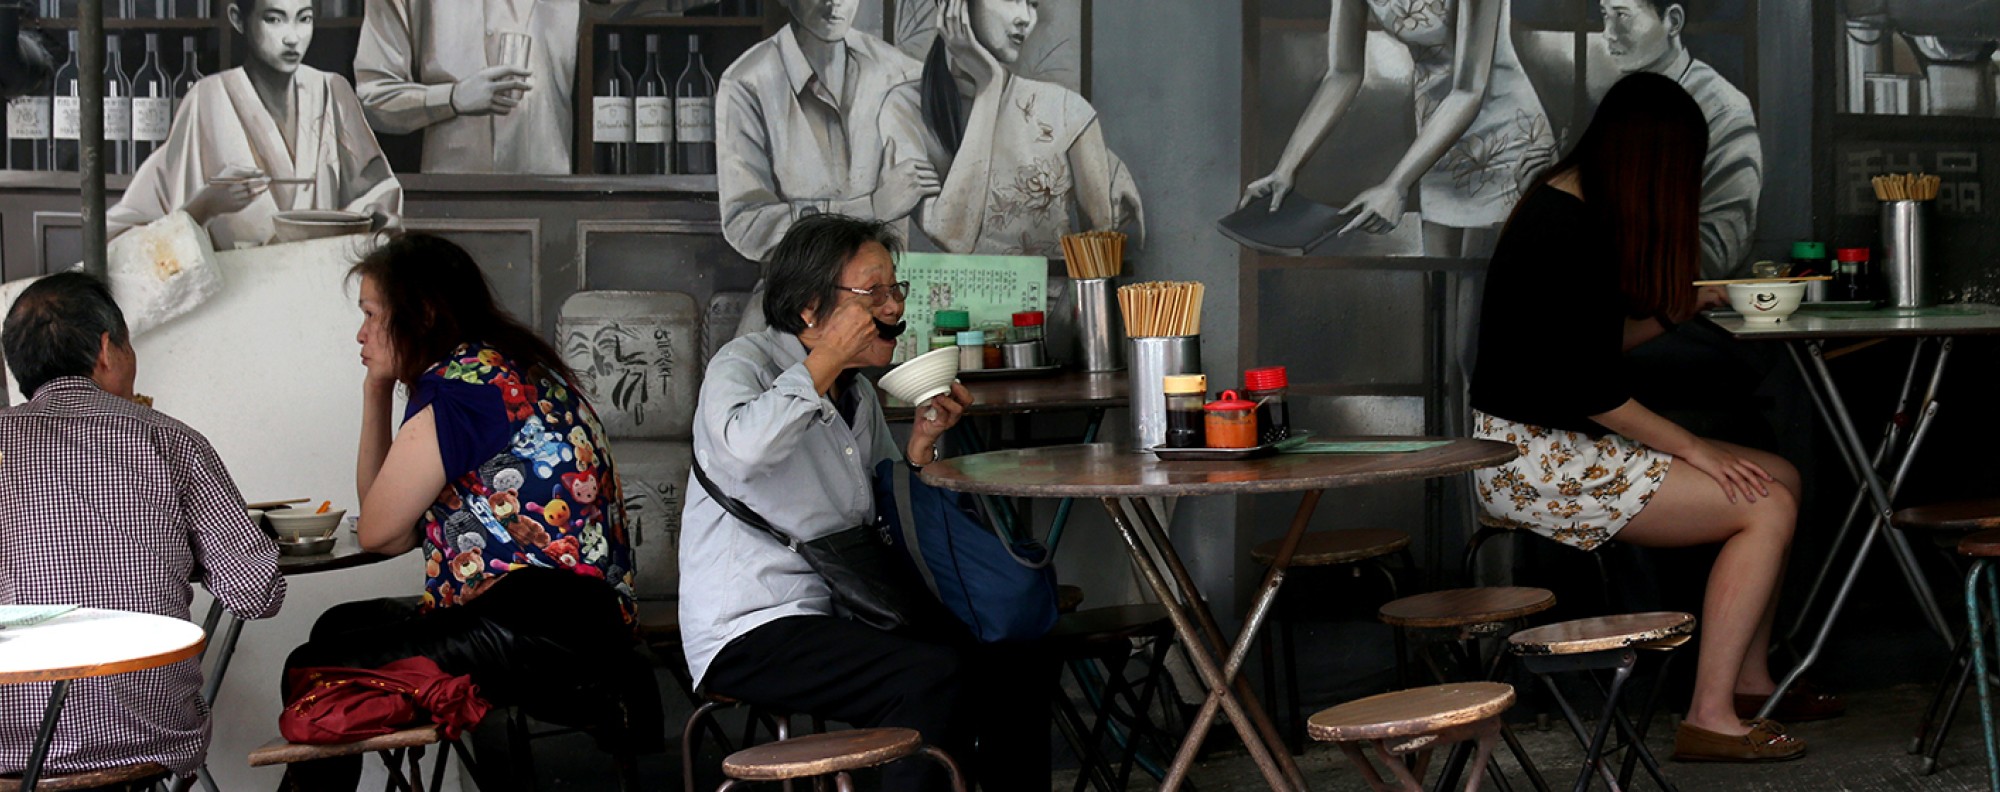 Hongkongers eating in Central. Photo: K. Y. Cheng